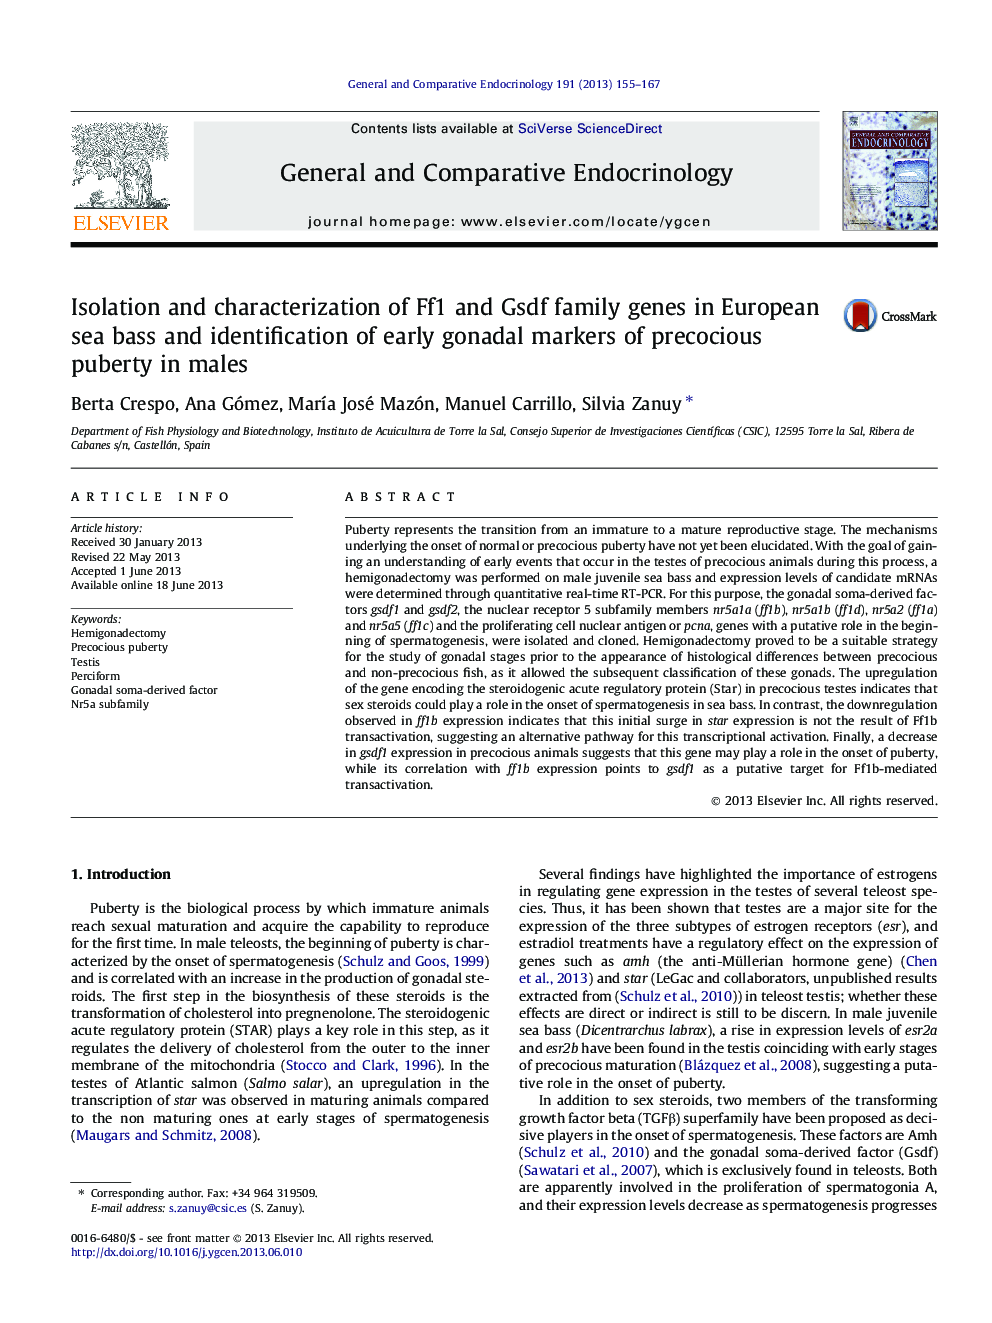 Isolation and characterization of Ff1 and Gsdf family genes in European sea bass and identification of early gonadal markers of precocious puberty in males